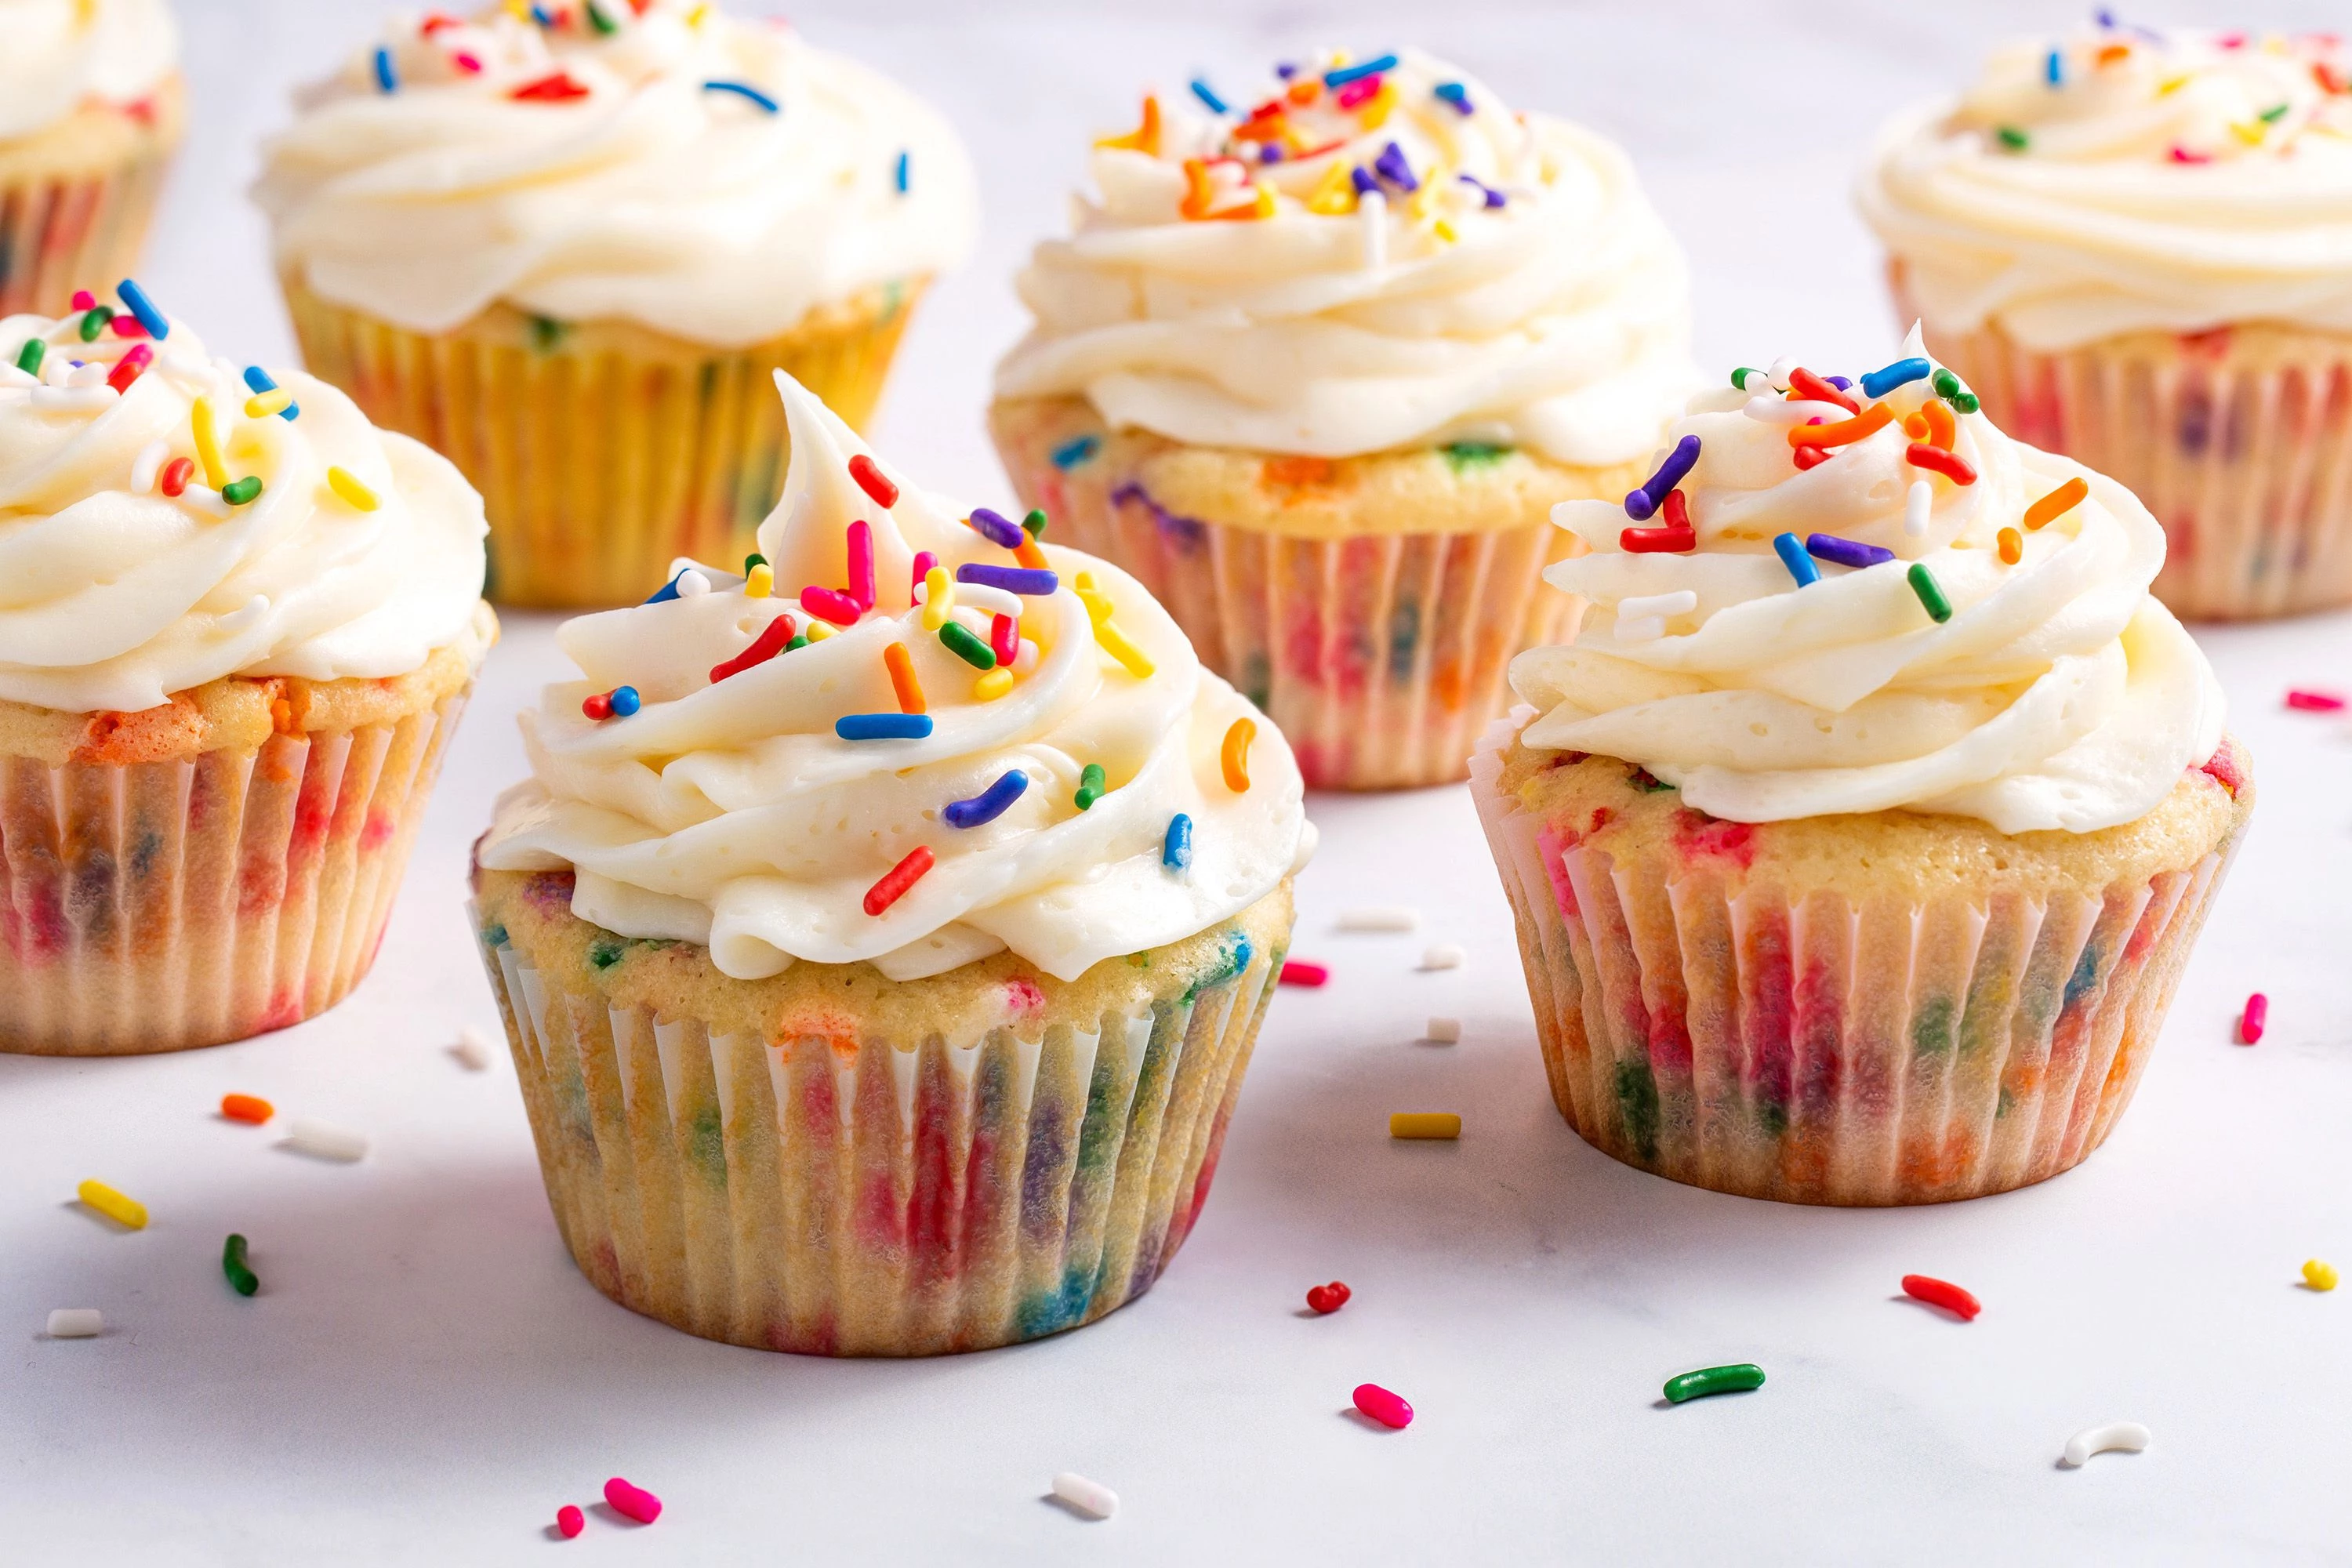 If seven adults can eat seven cupcakes in seven minutes, how long would it take 30 adults to eat 30 cupcakes?